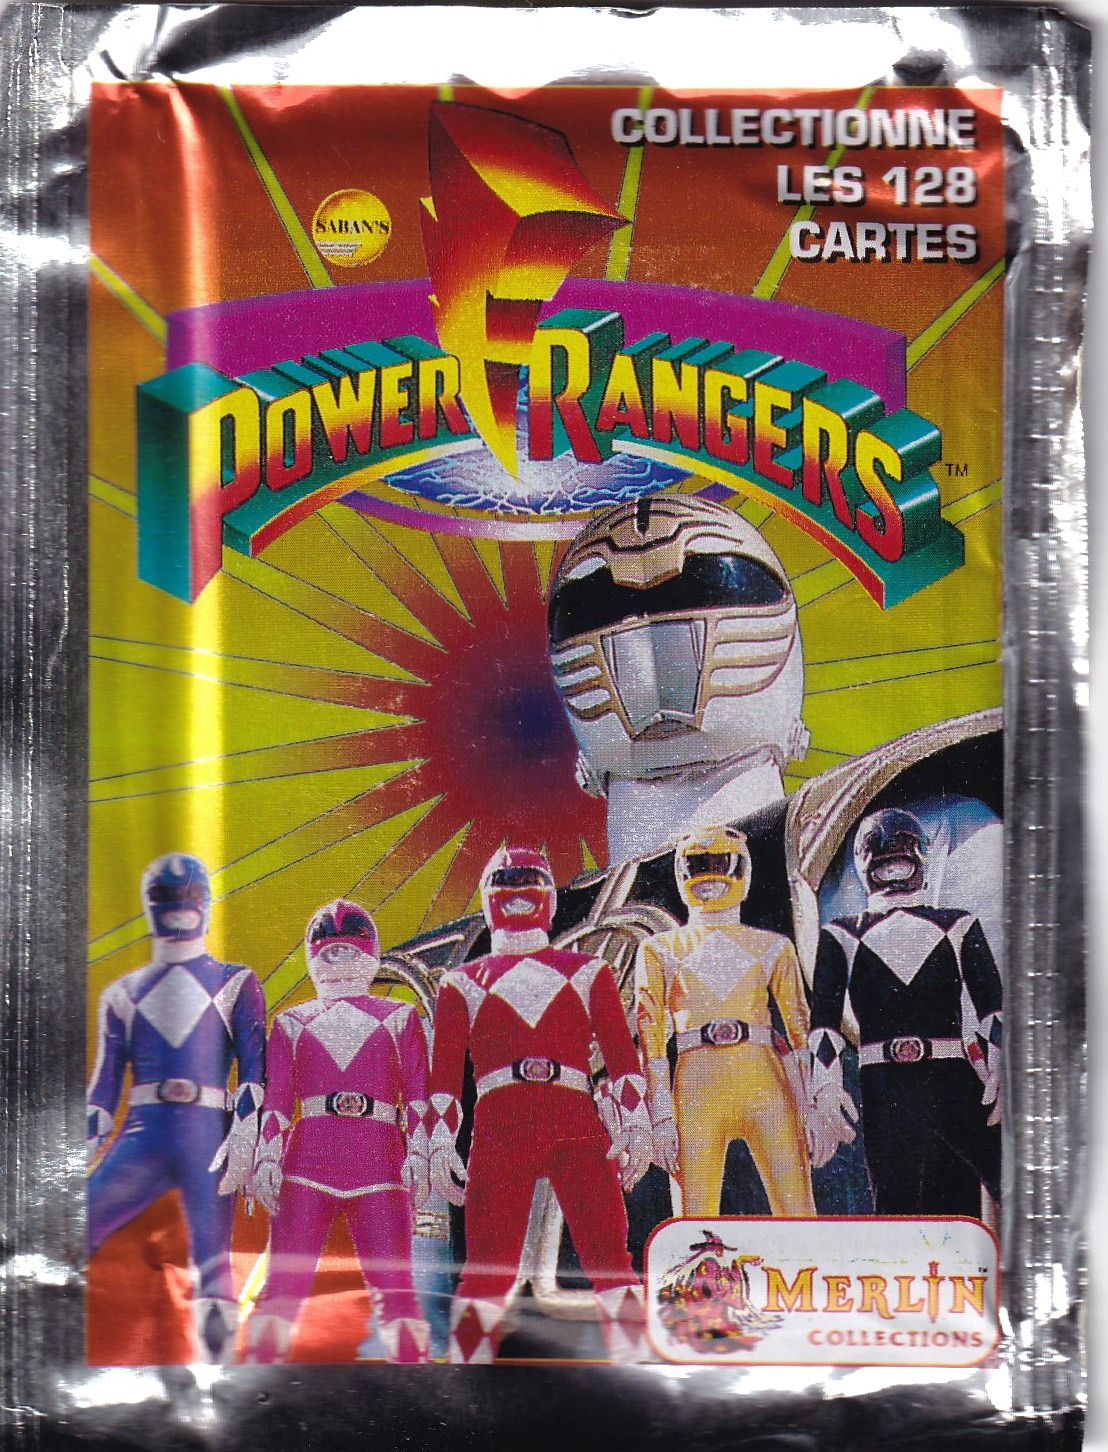 Power Rangers Trading Cards